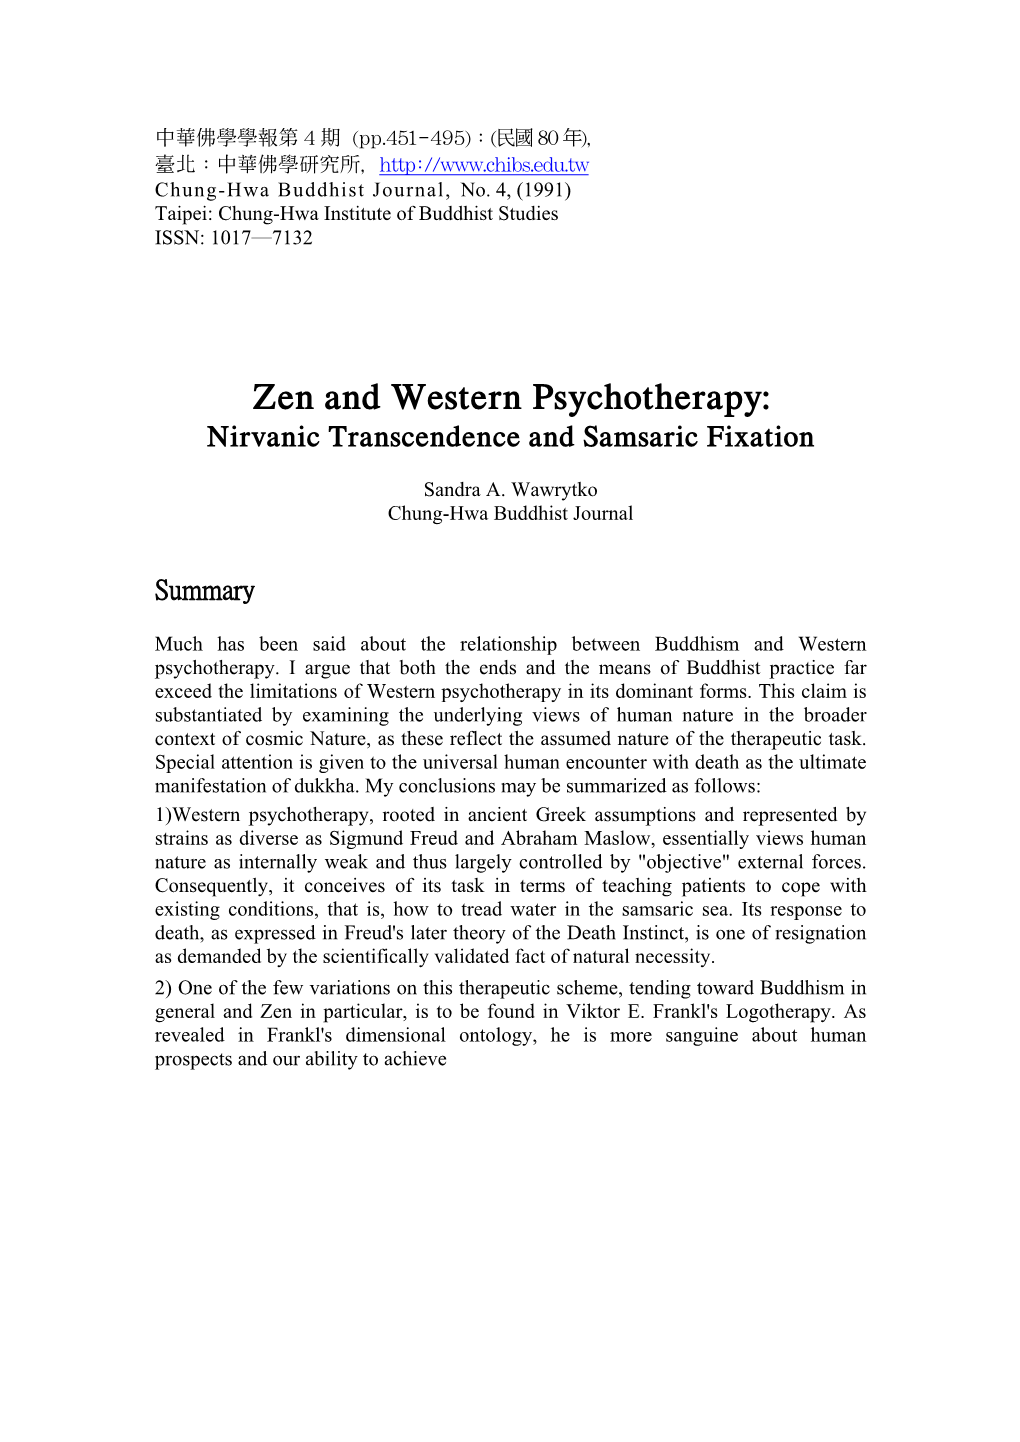 Zen and Western Psychotherapy: Nirvanic Transcendence and Samsaric Fixation